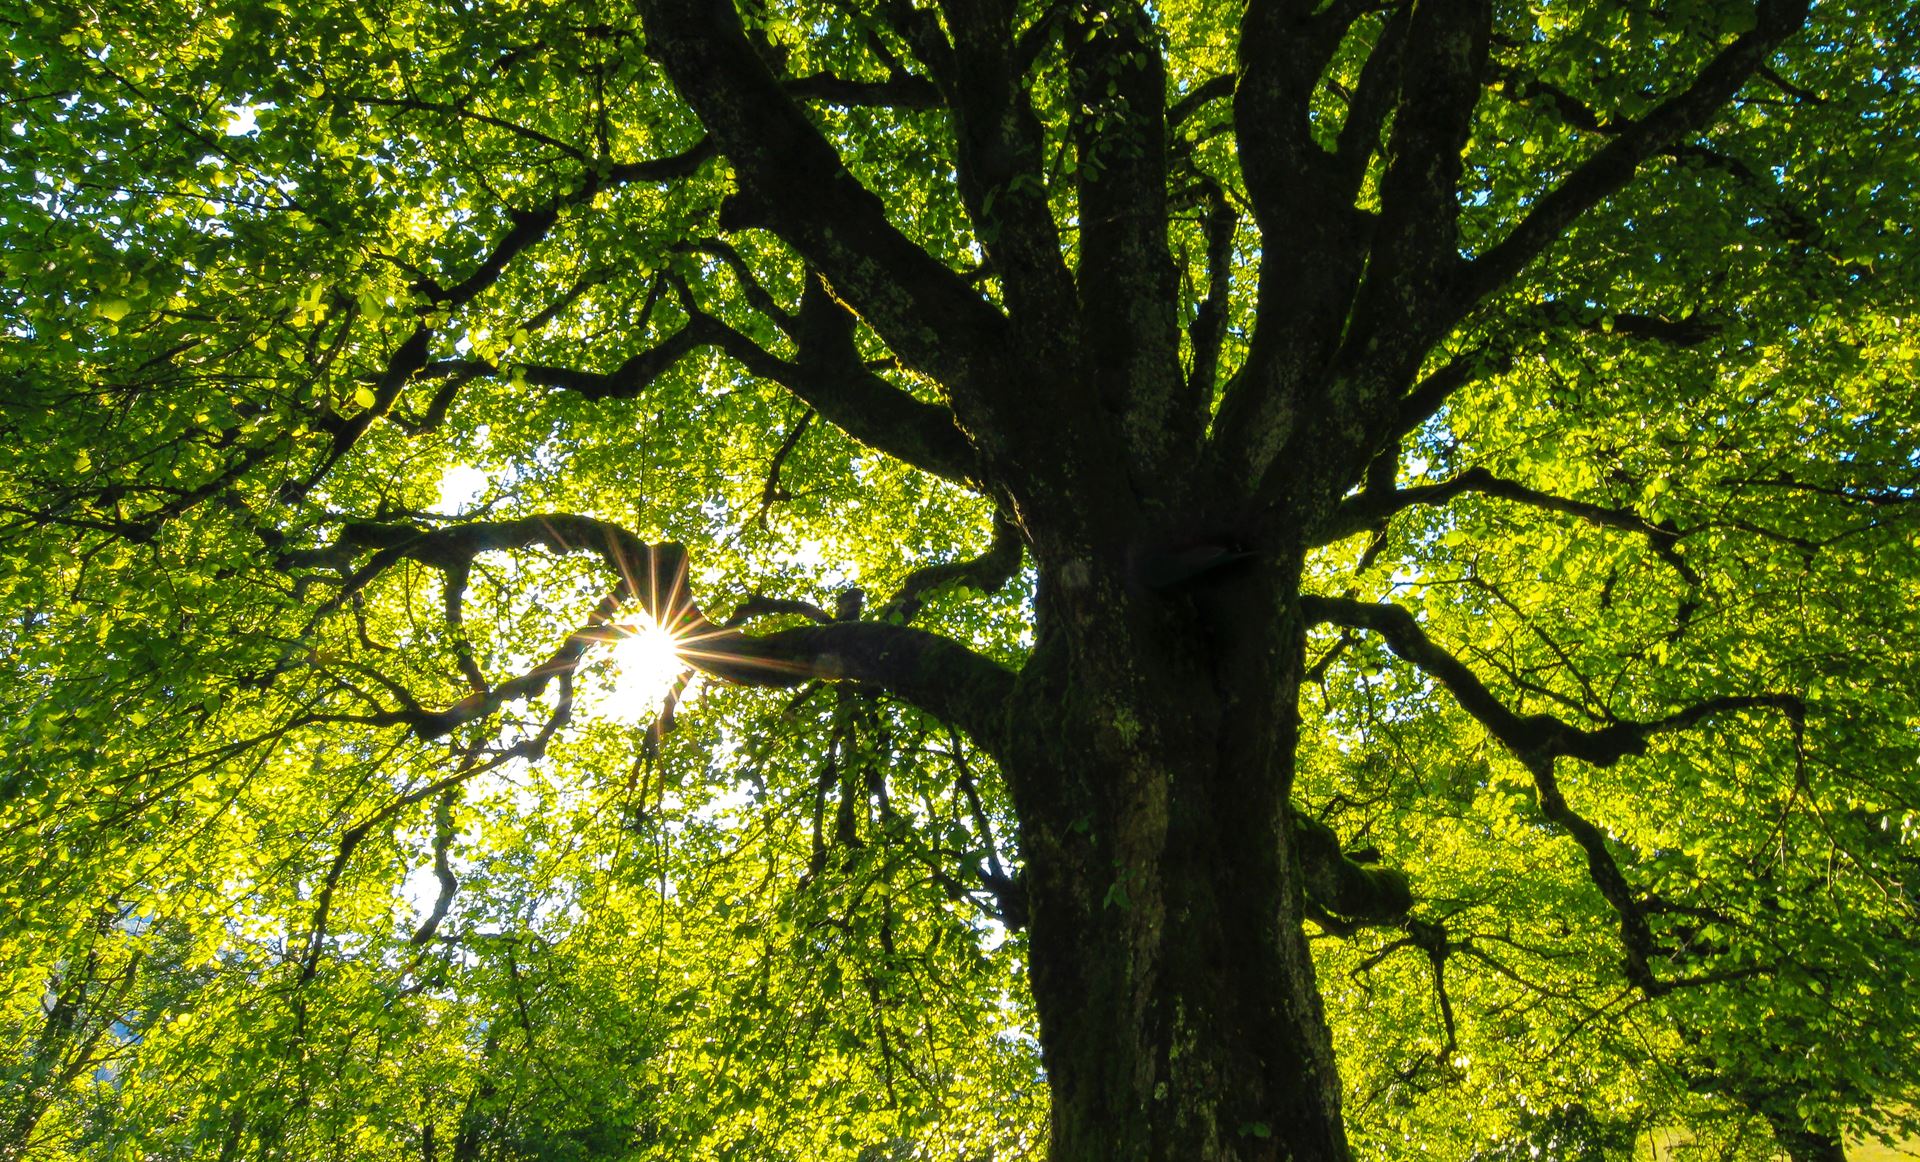 large tree with dappled sunshine through the leaves